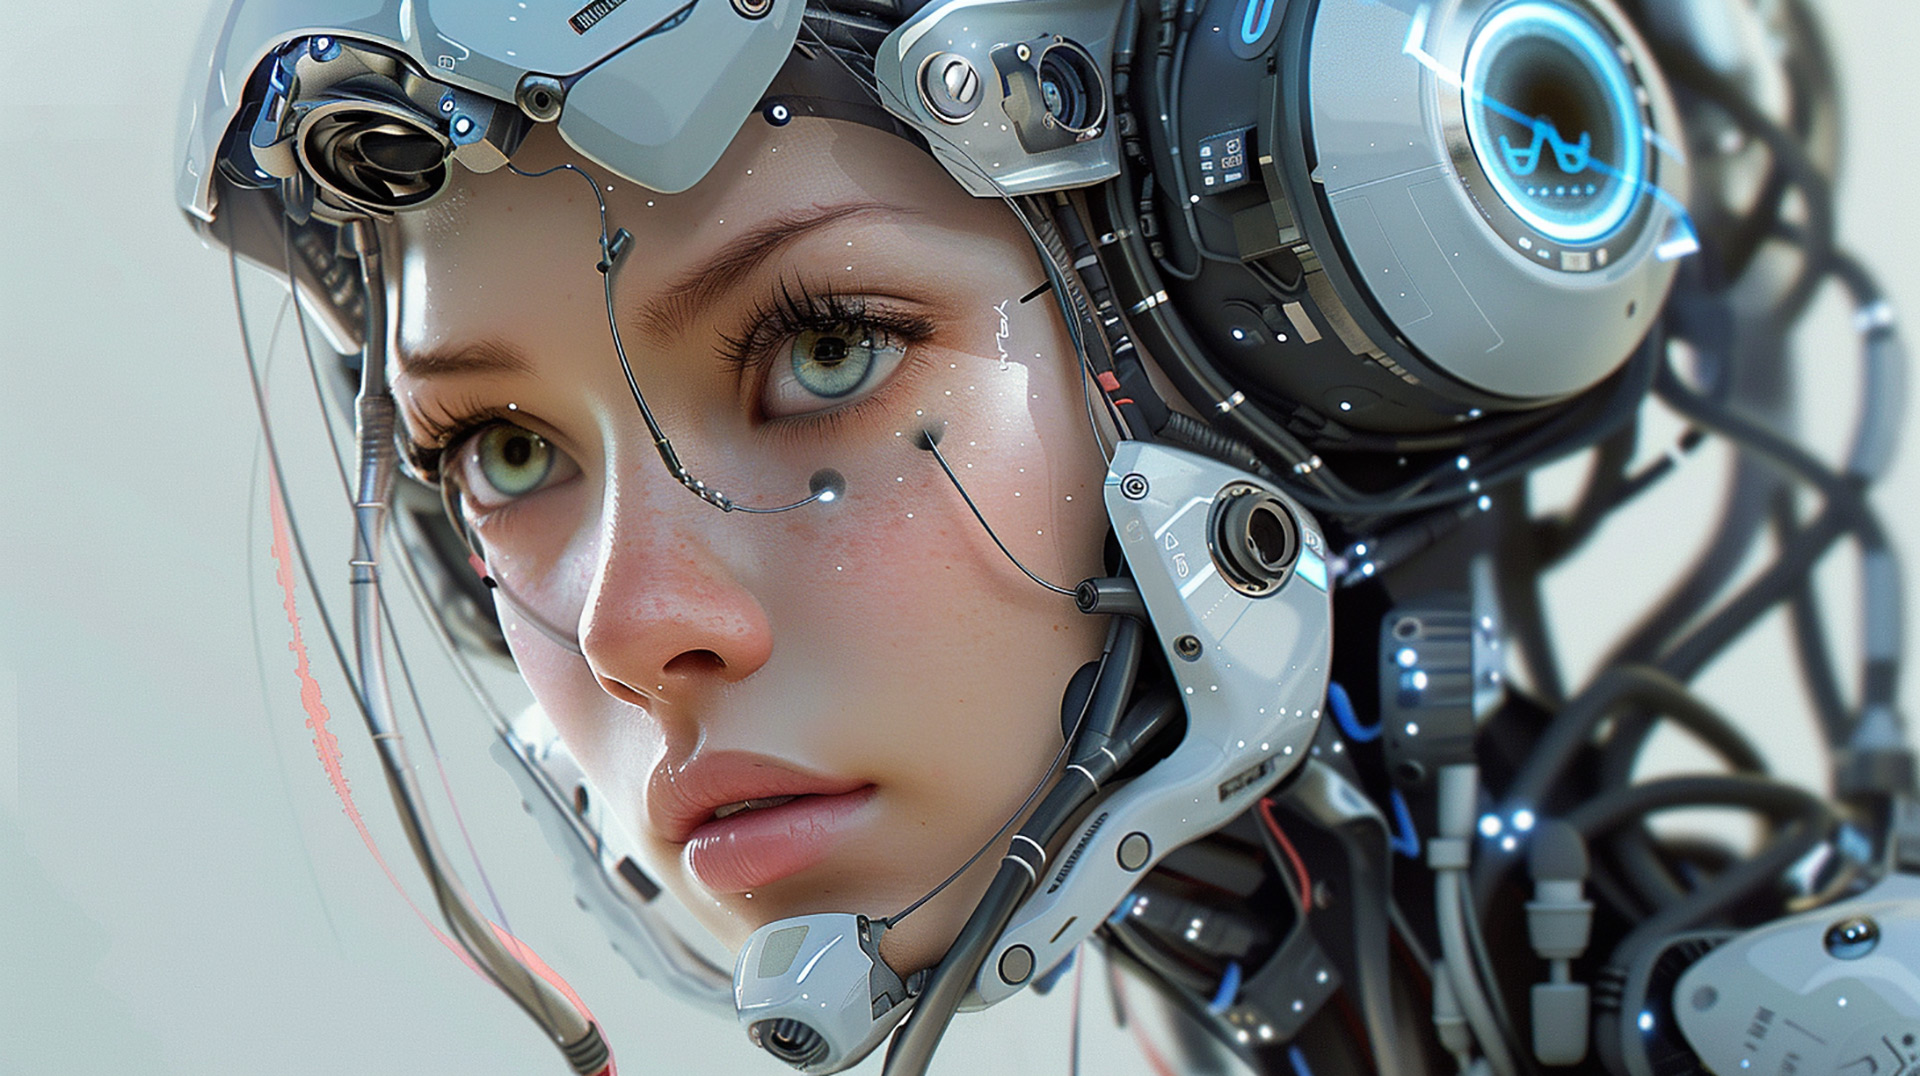 Neural Nymph: AI-Driven Robot Girl Wallpapers in 4K